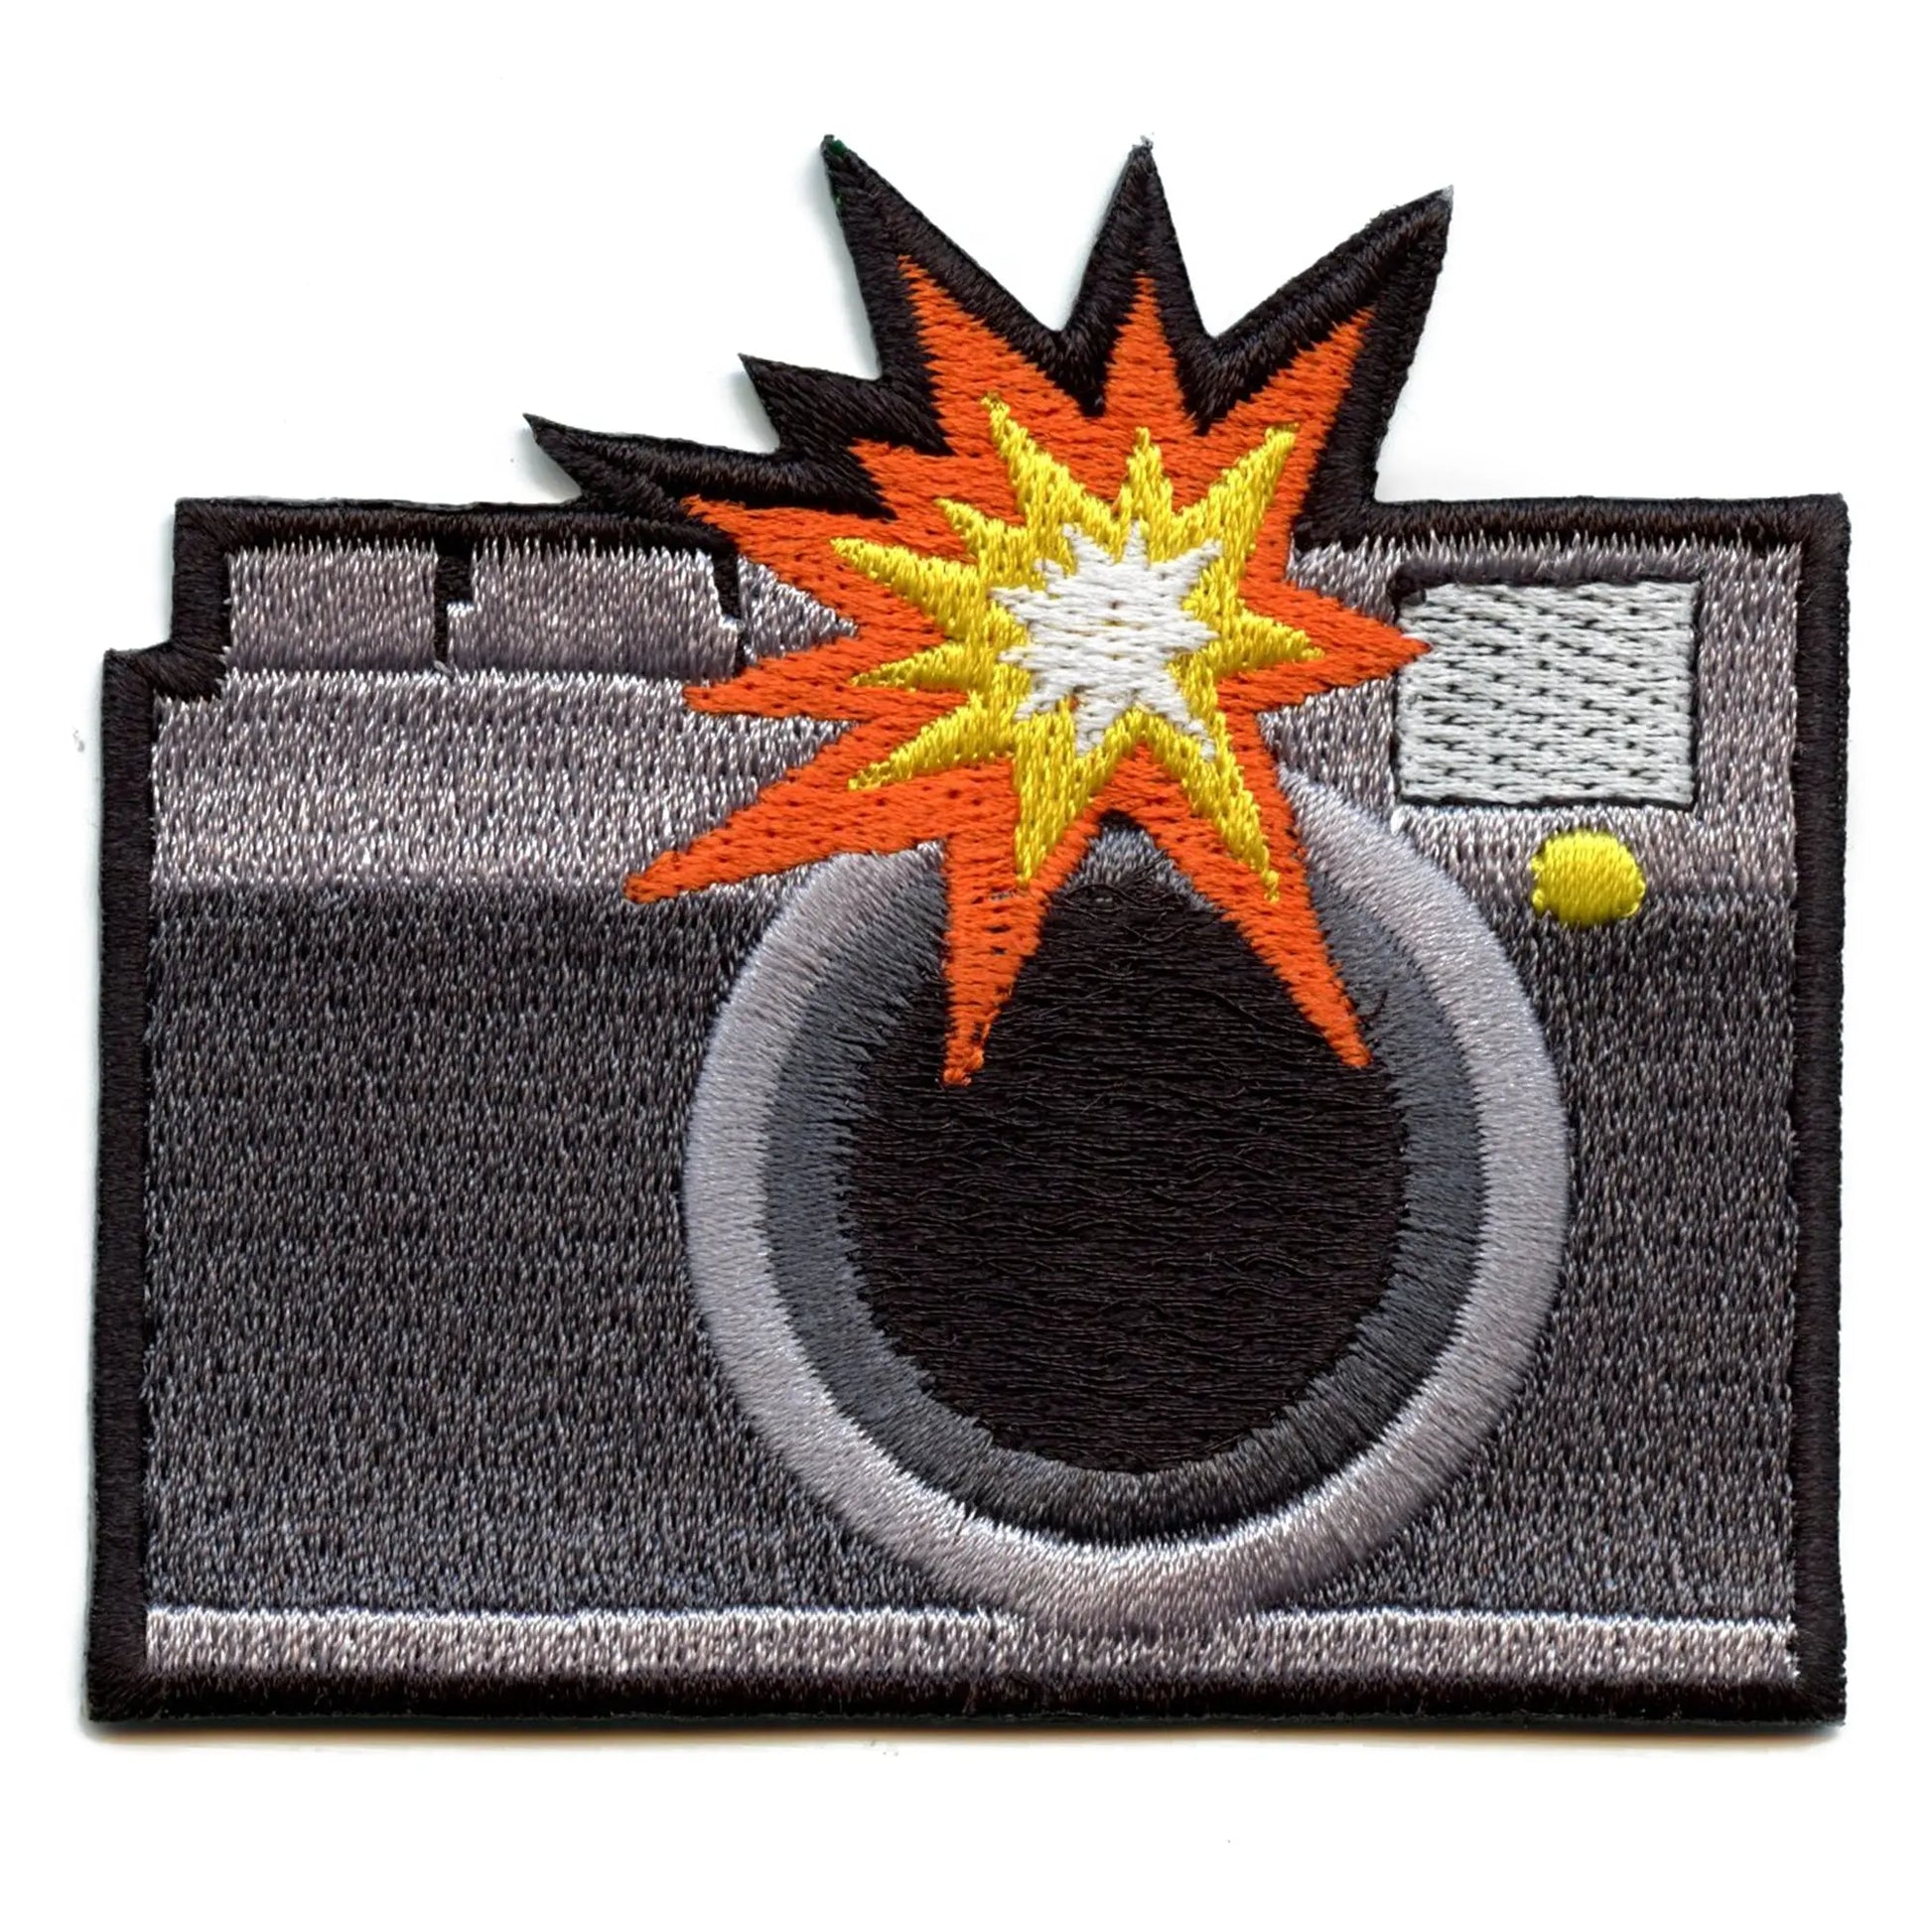 Camera with Flash Emoji Iron On Embroidered Patch 